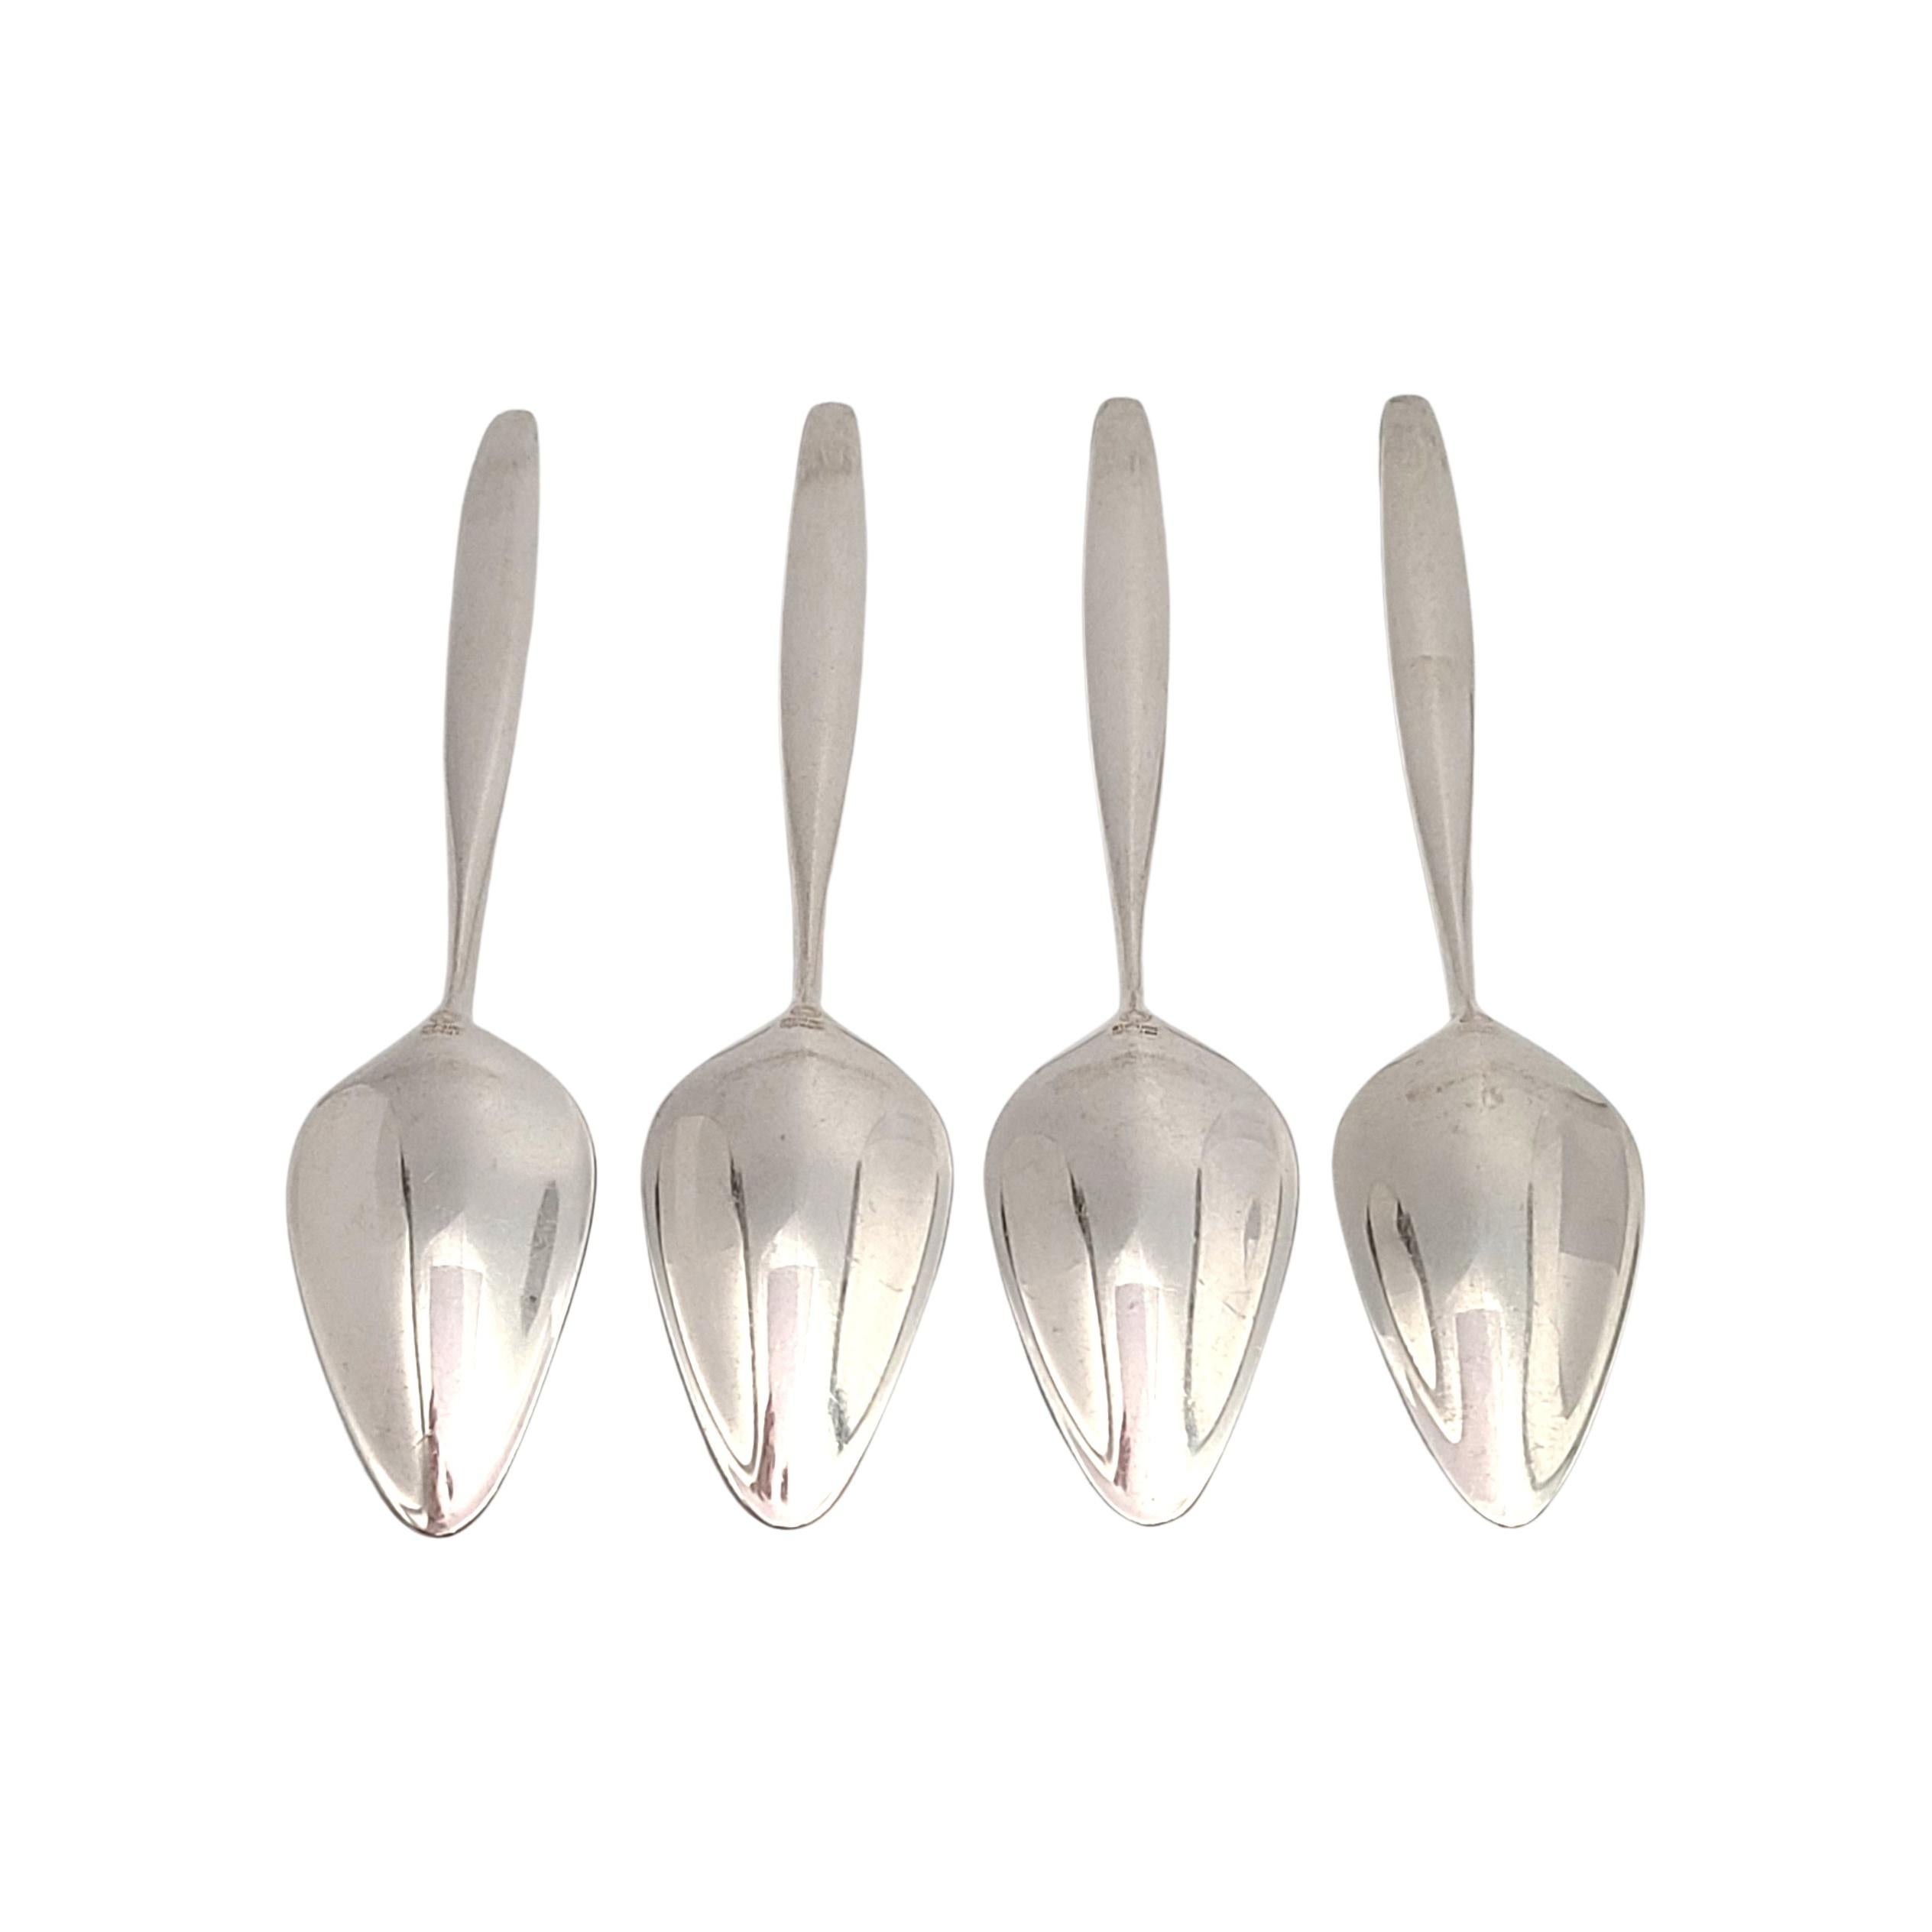 Set of 4 sterling silver fruit/orange spoons in the Cypress pattern by Georg Jensen

The Cypress pattern was designed by Tias Eckhoff in 1953 and won a gold medal for design in 1954. Its mid-century design is a timeless classic.

Measures approx 6